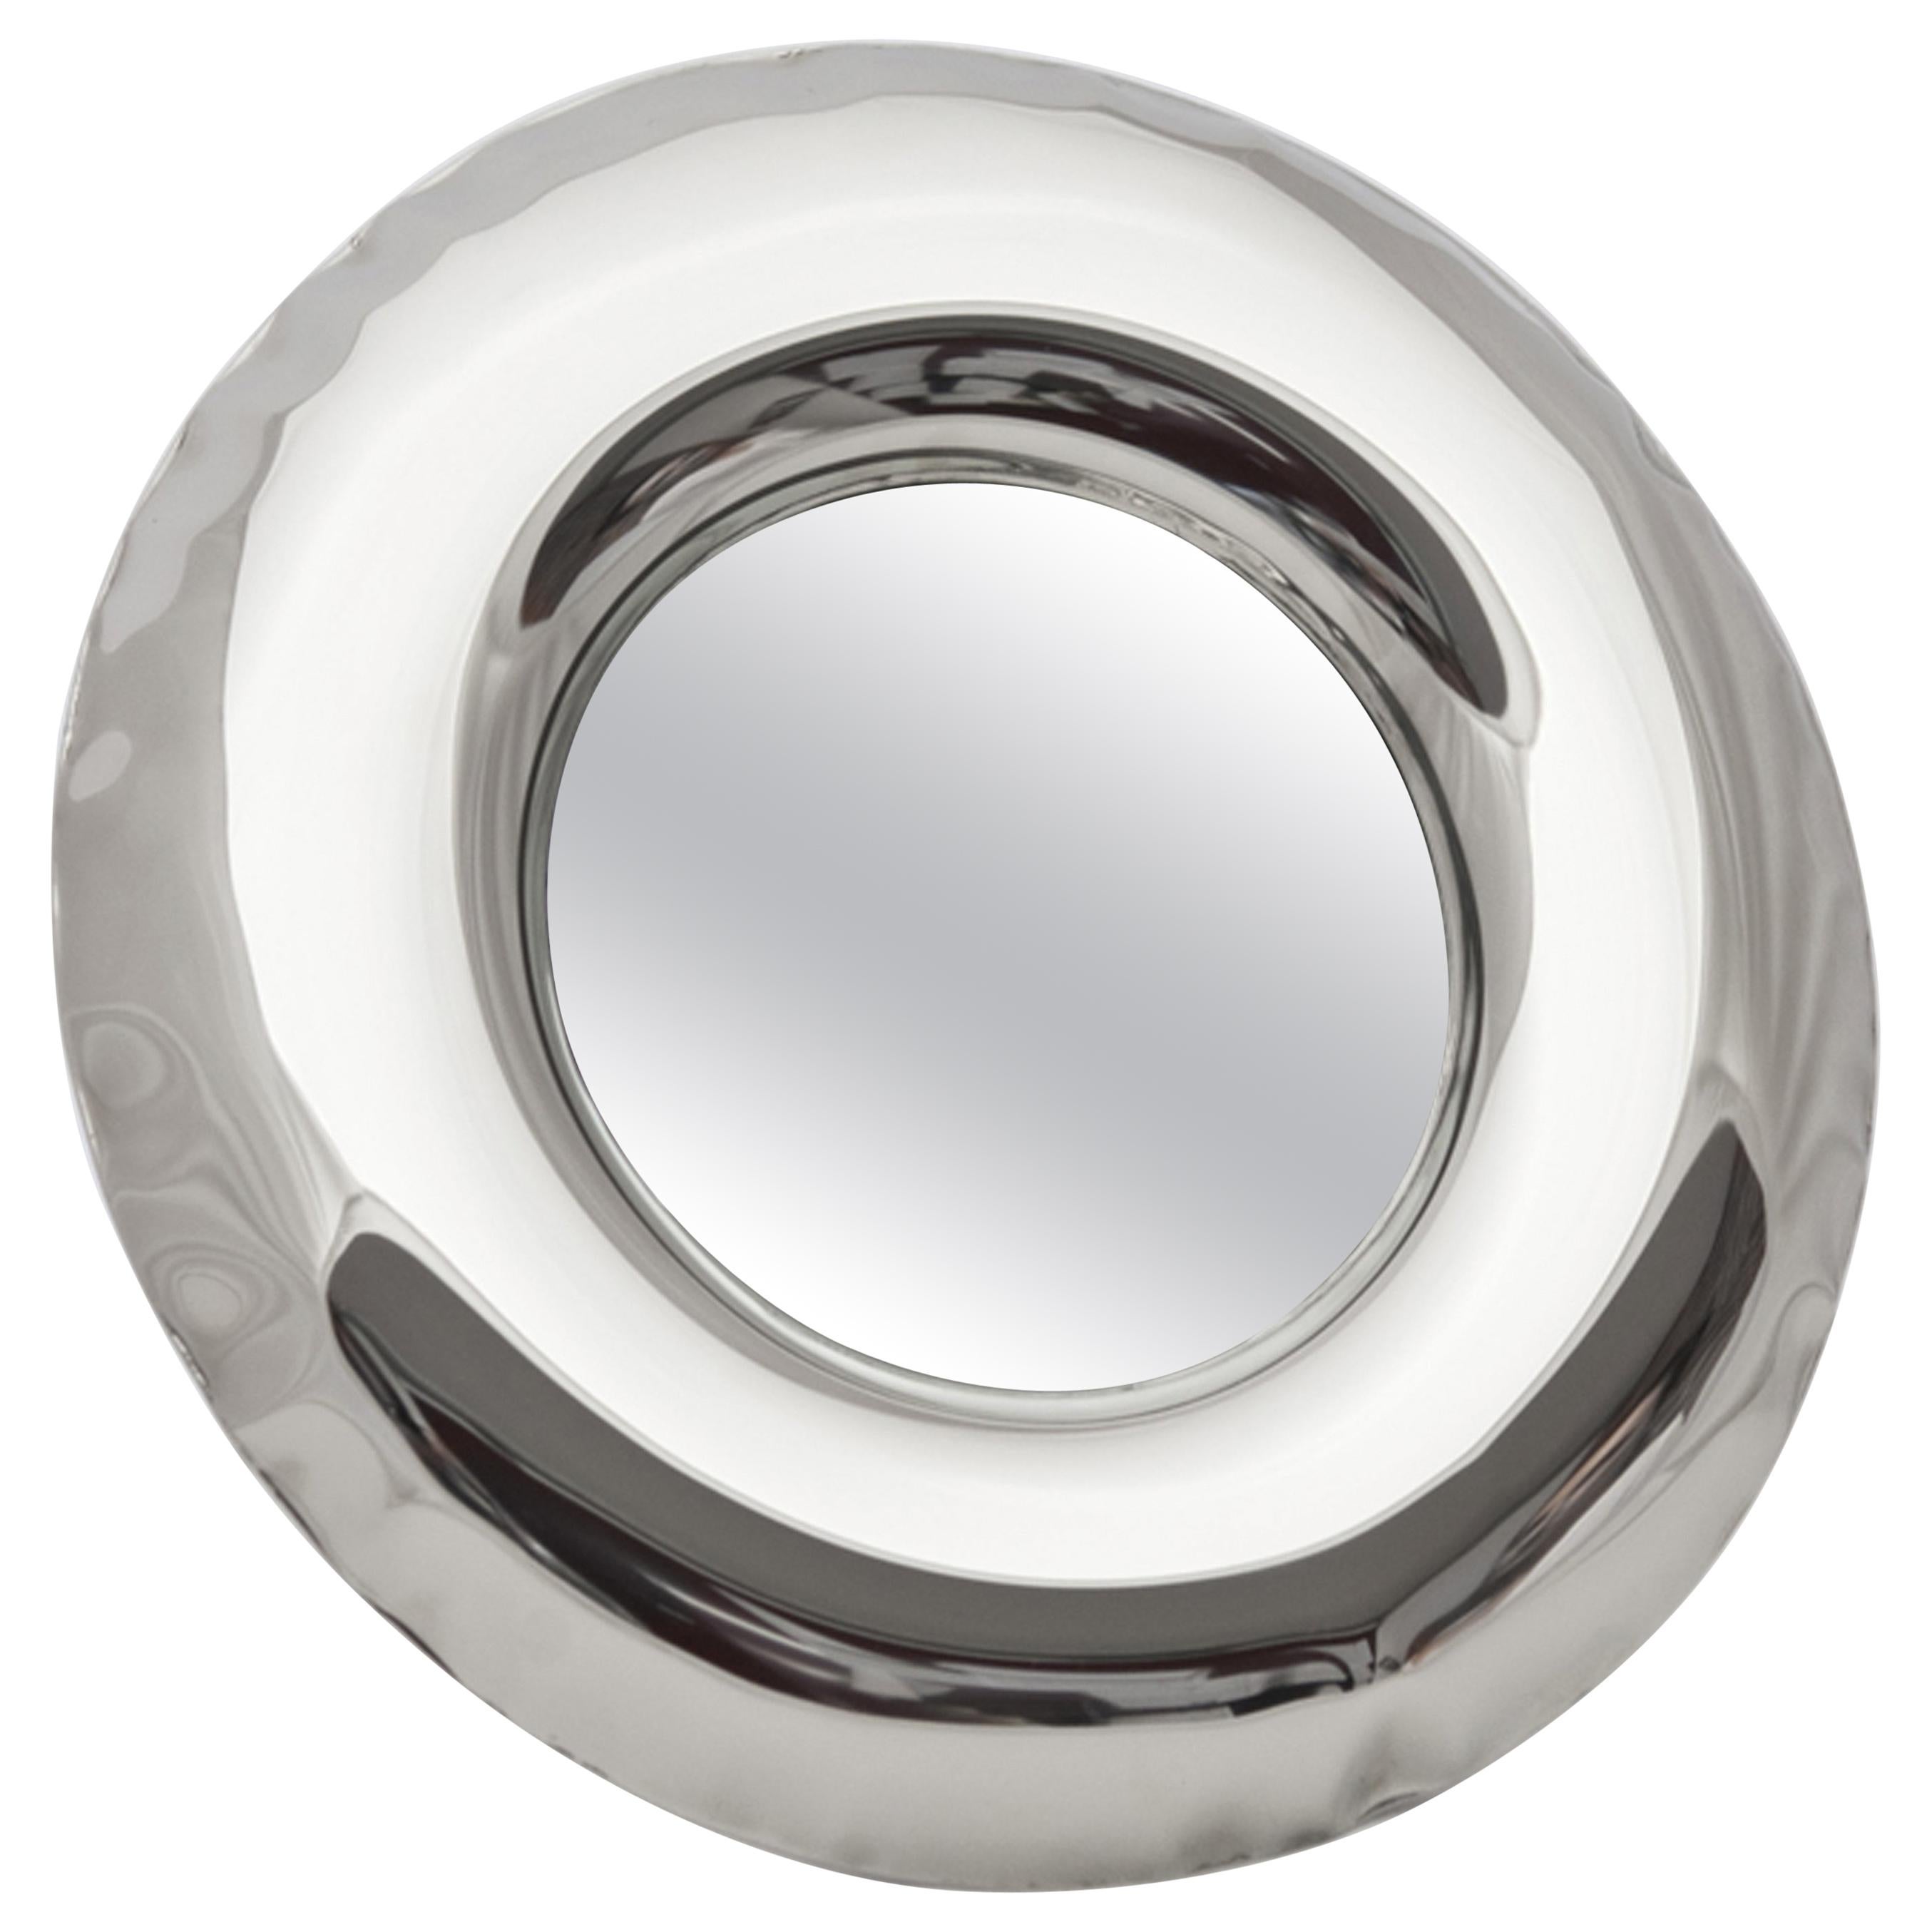 Rondel 36 Polished Stainless Steel Wall Mirror by Zieta